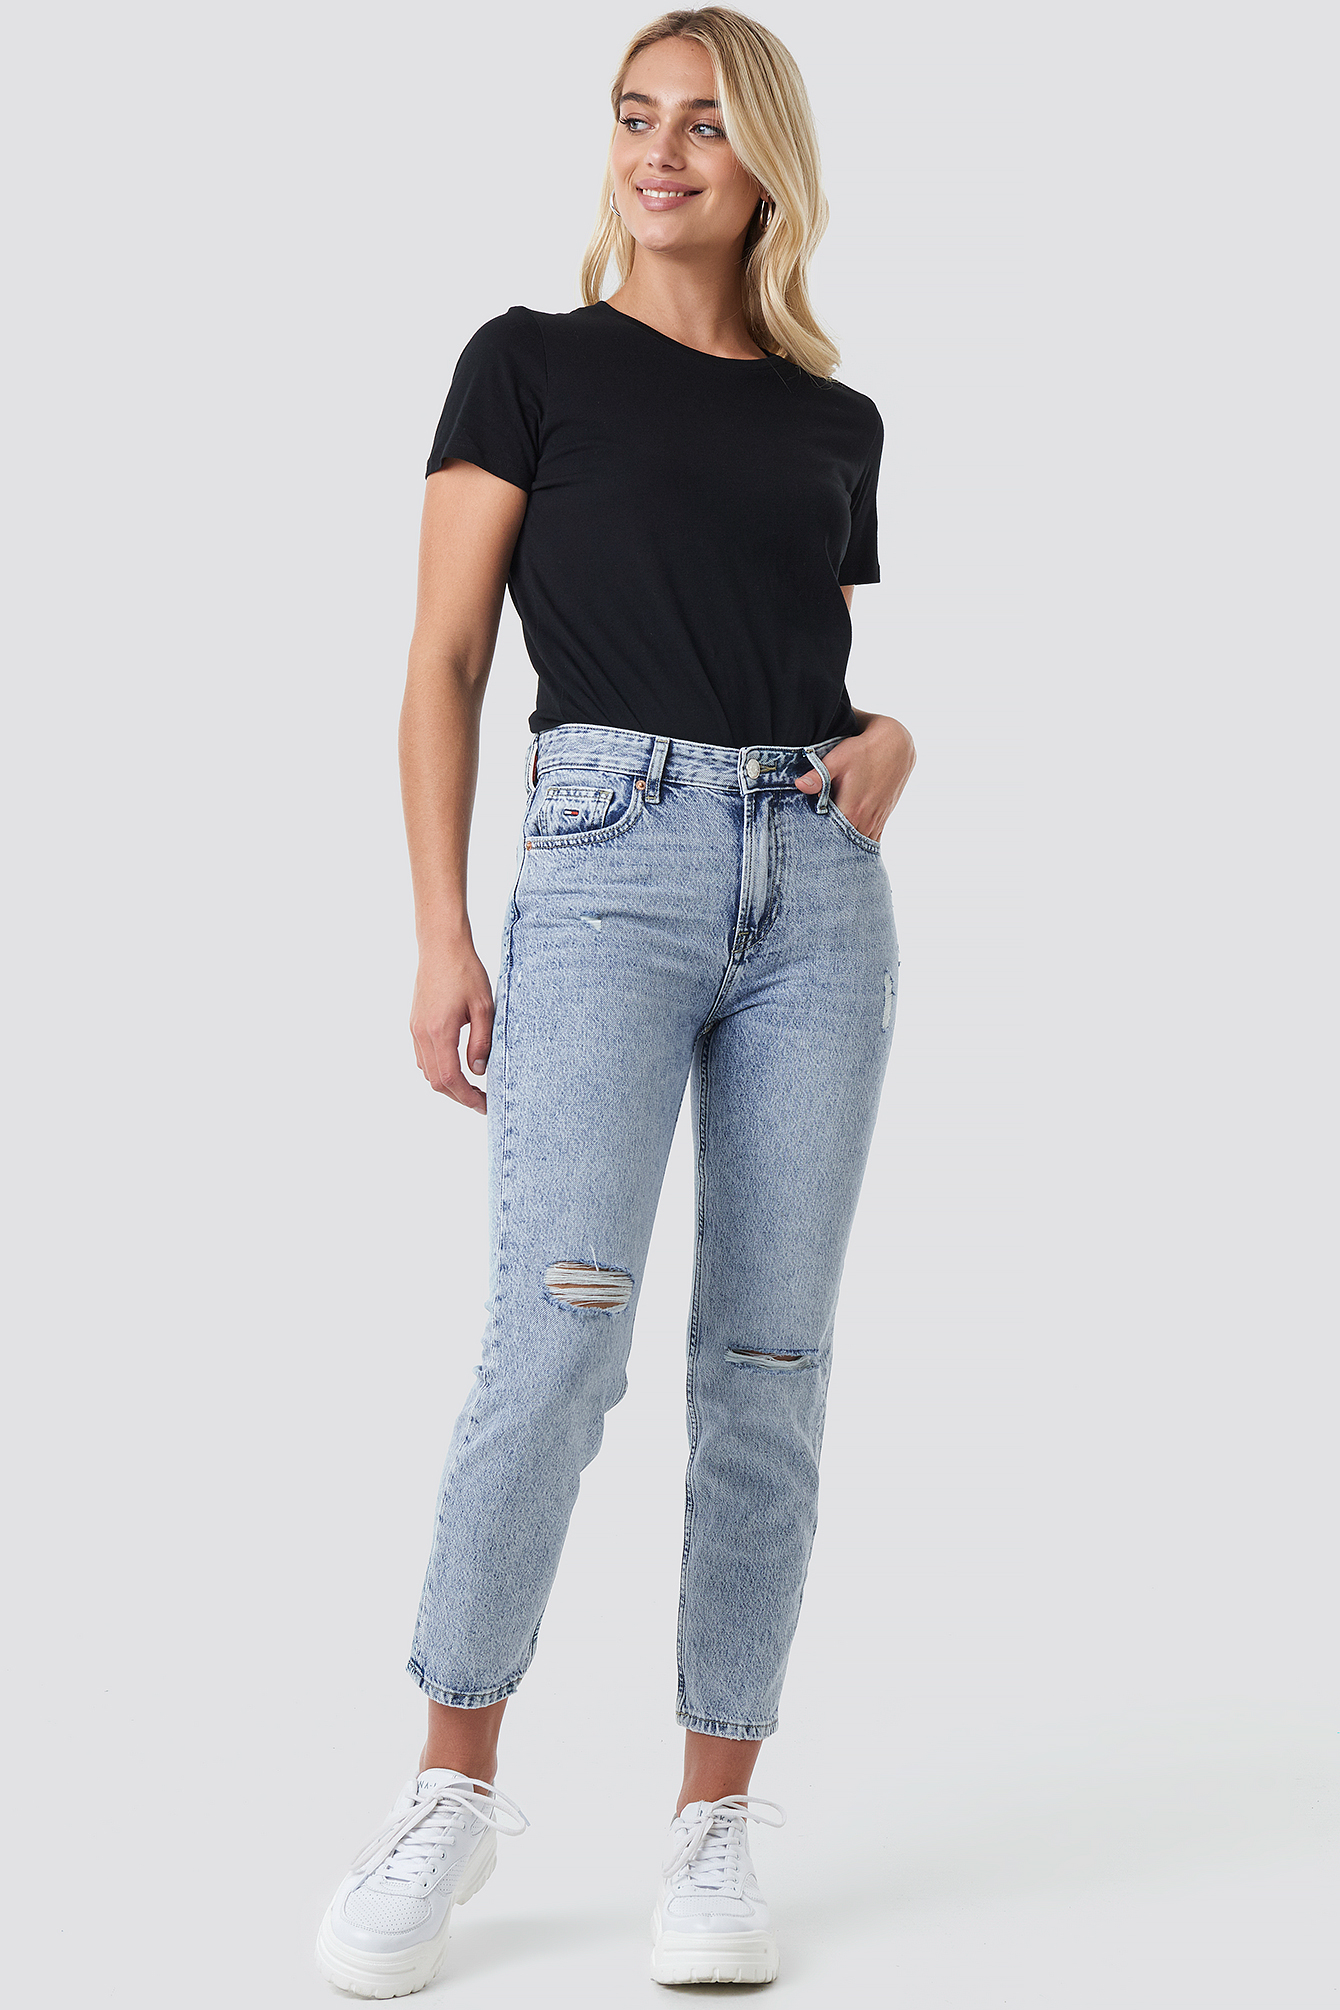 tommy jeans high rise slim cropped izzy